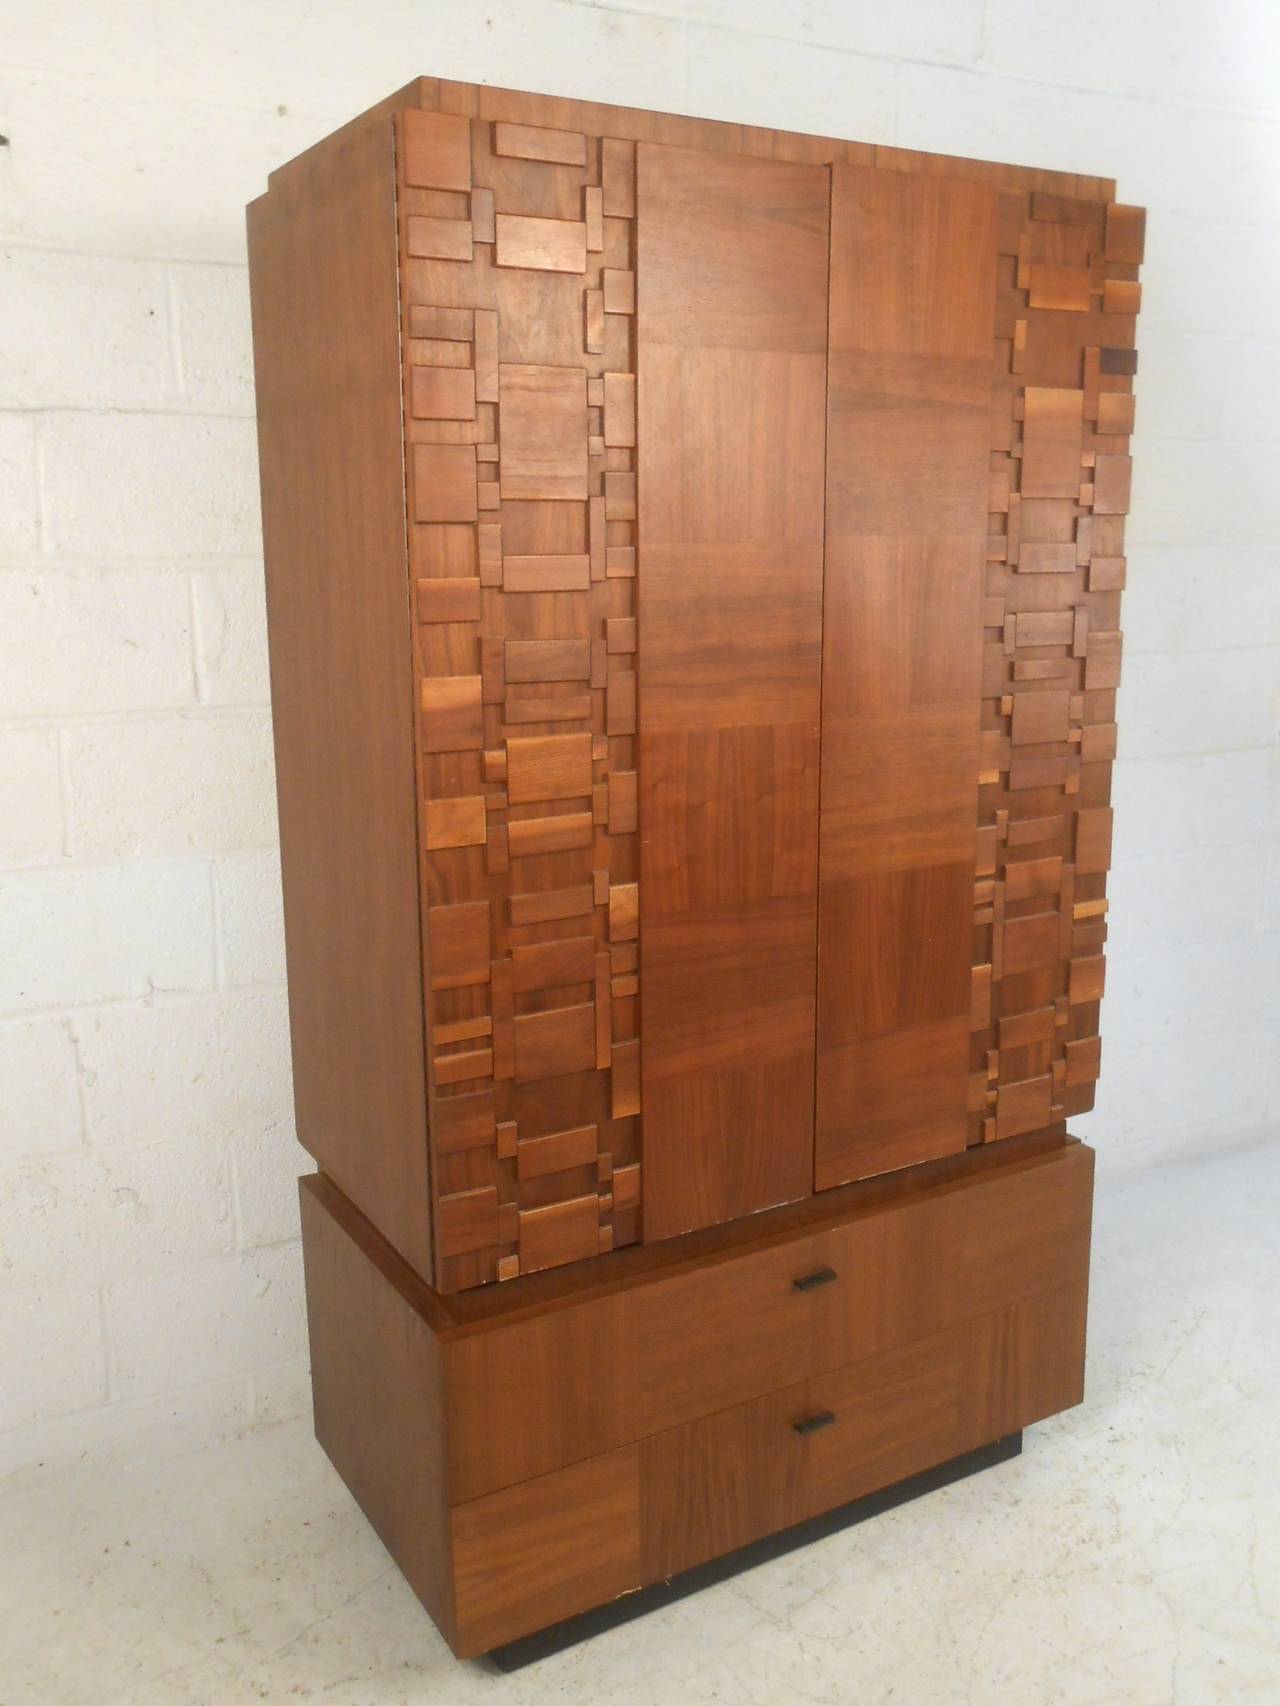 This gorgeous vintage armoire by Lane combines brutalist style details with a multi-veneer face to make a stylish storage piece for any interior. Please confirm item location (NY or NJ), match bedroom set available.